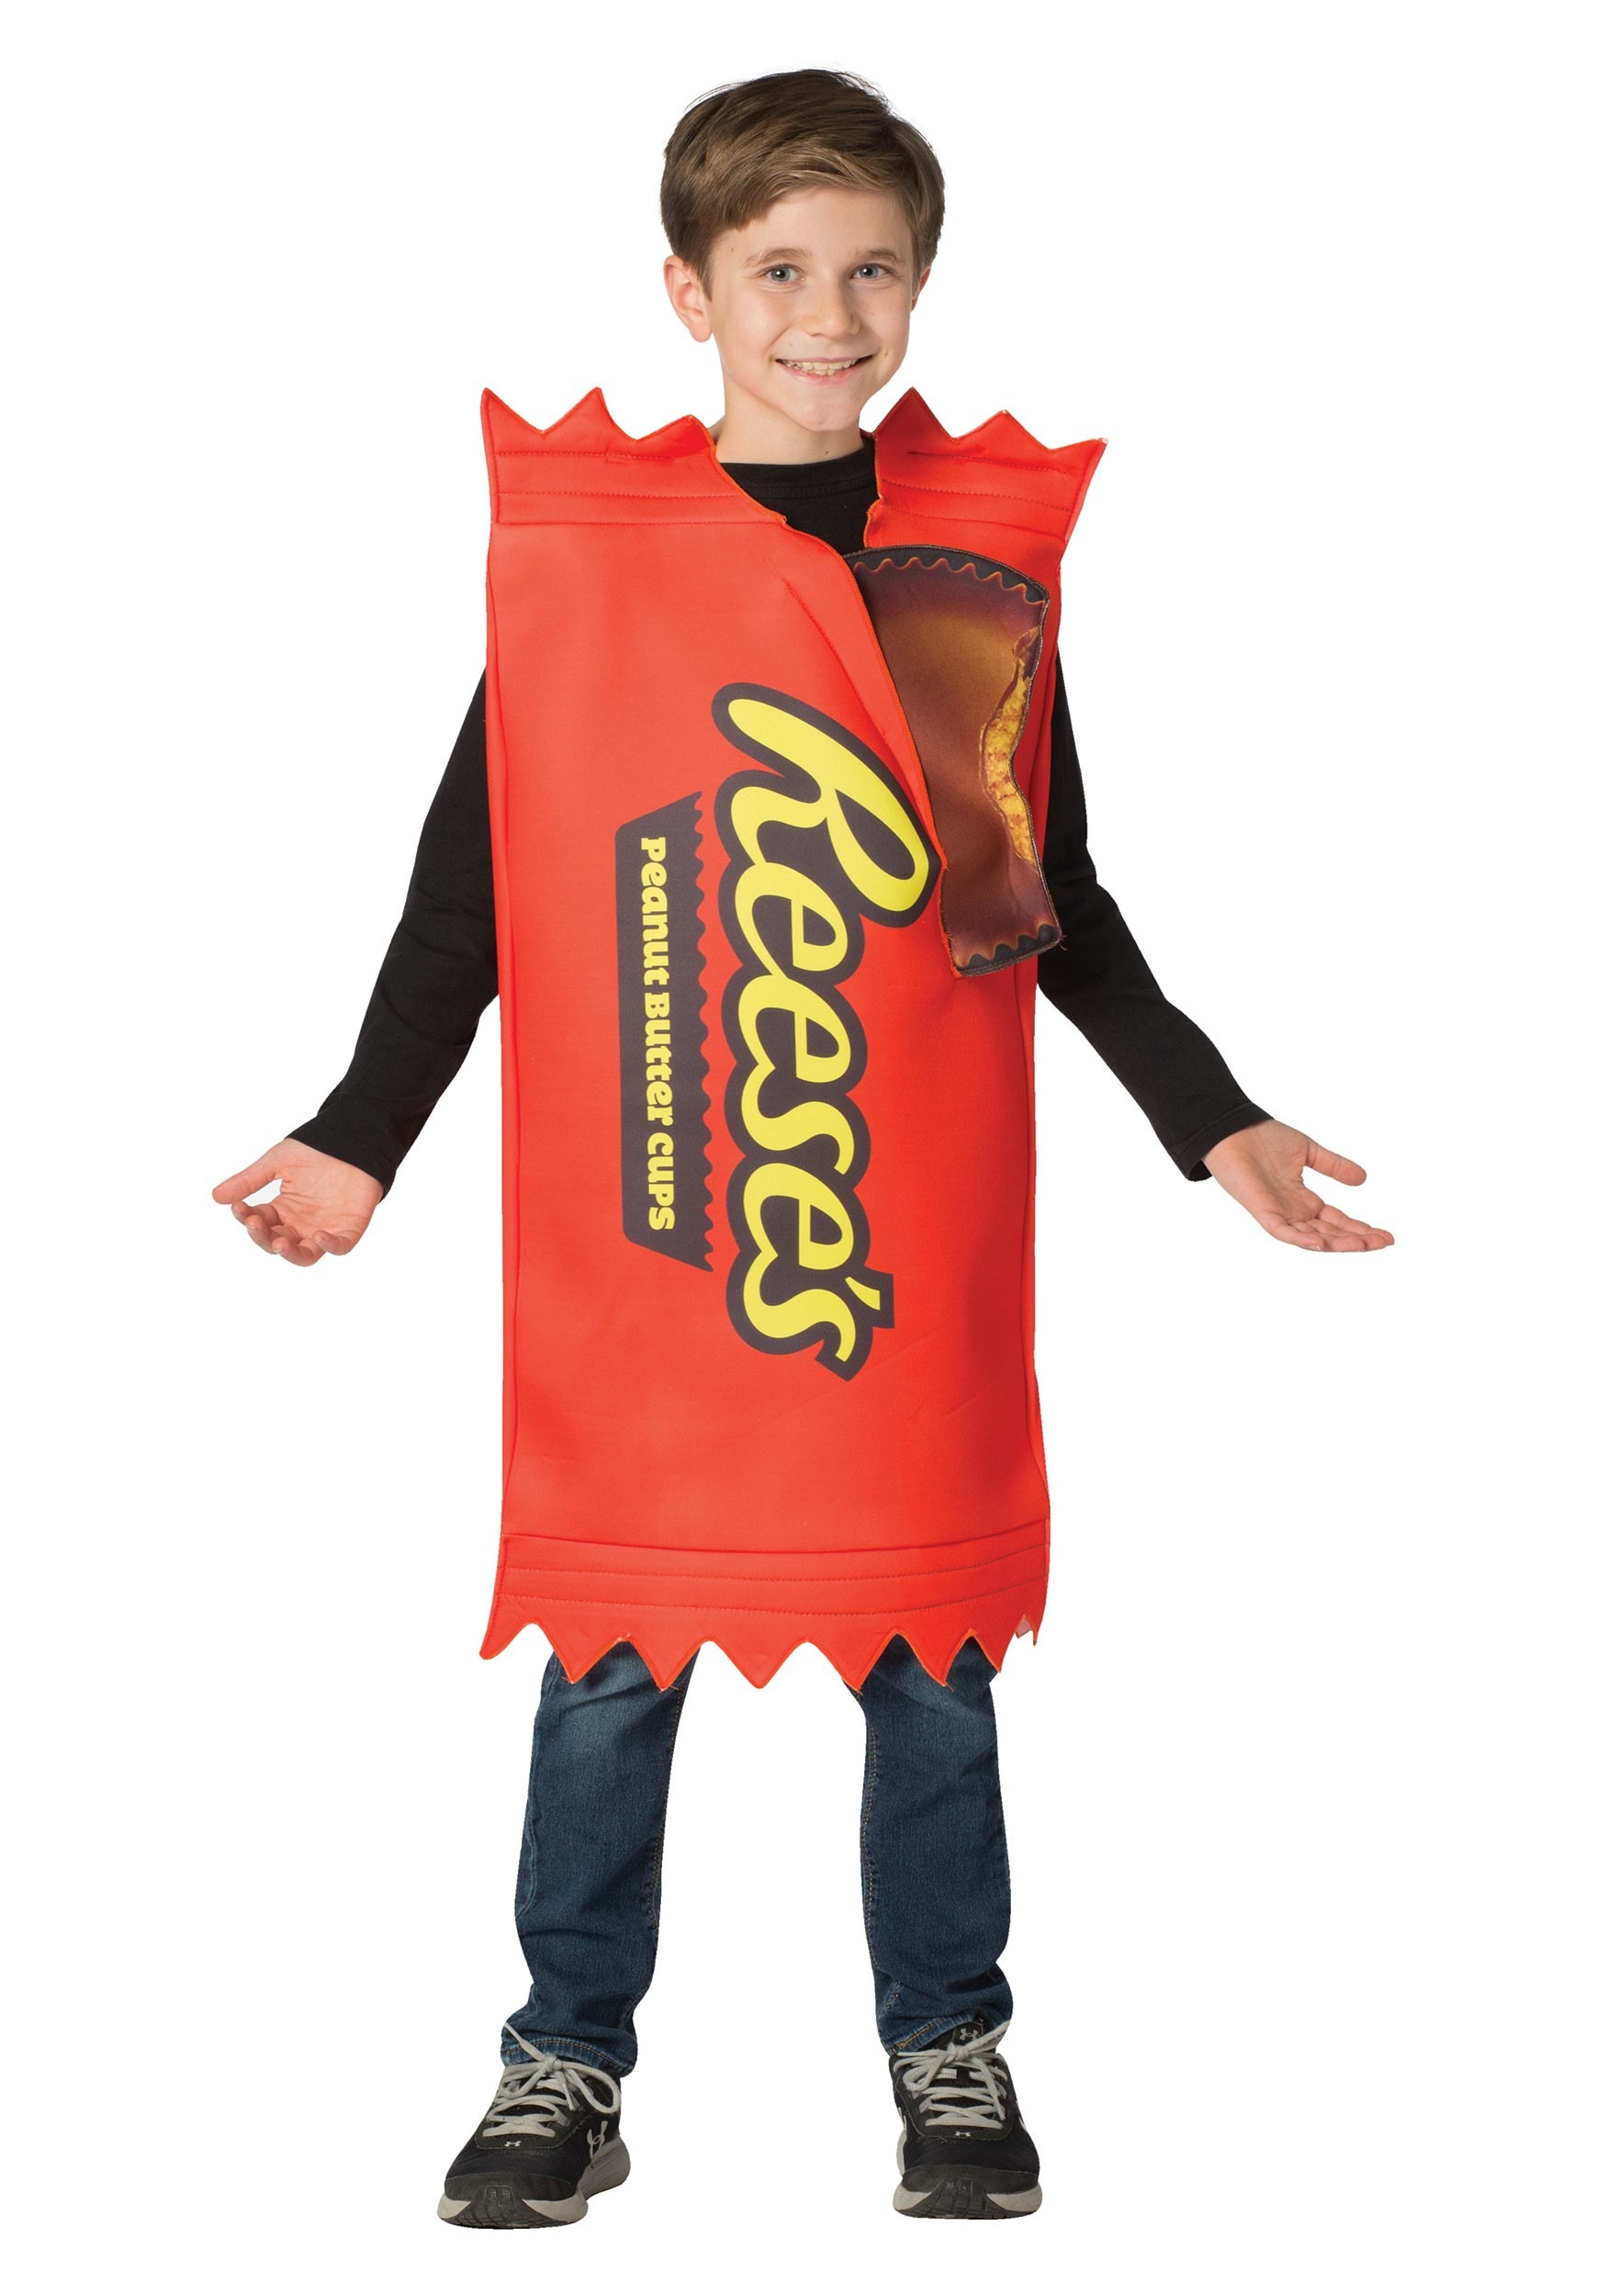 Reese’s Kids Reese’s Cup 2-Pack Costume